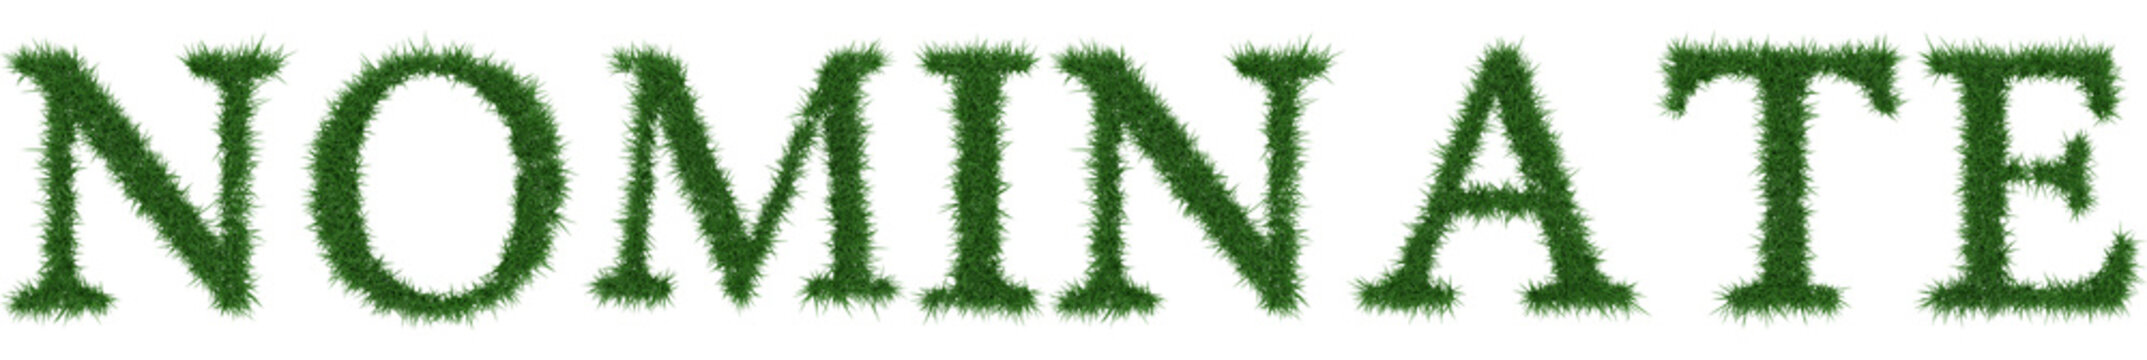 Nominate - 3D rendering fresh Grass letters isolated on whhite background.